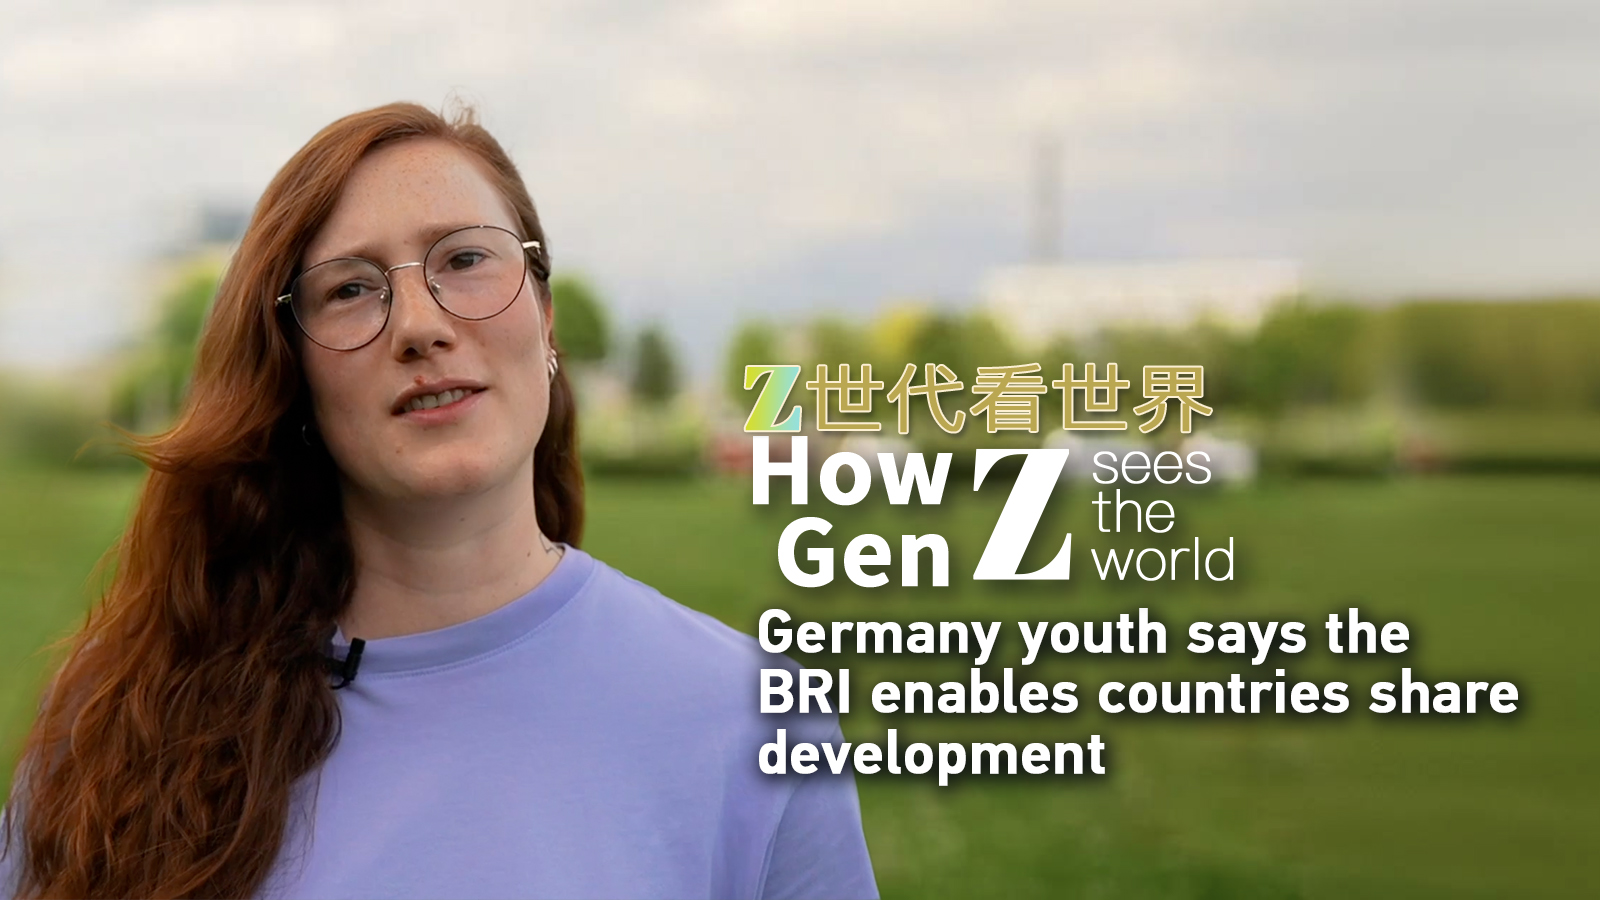 German youth says the BRI enables countries to share development